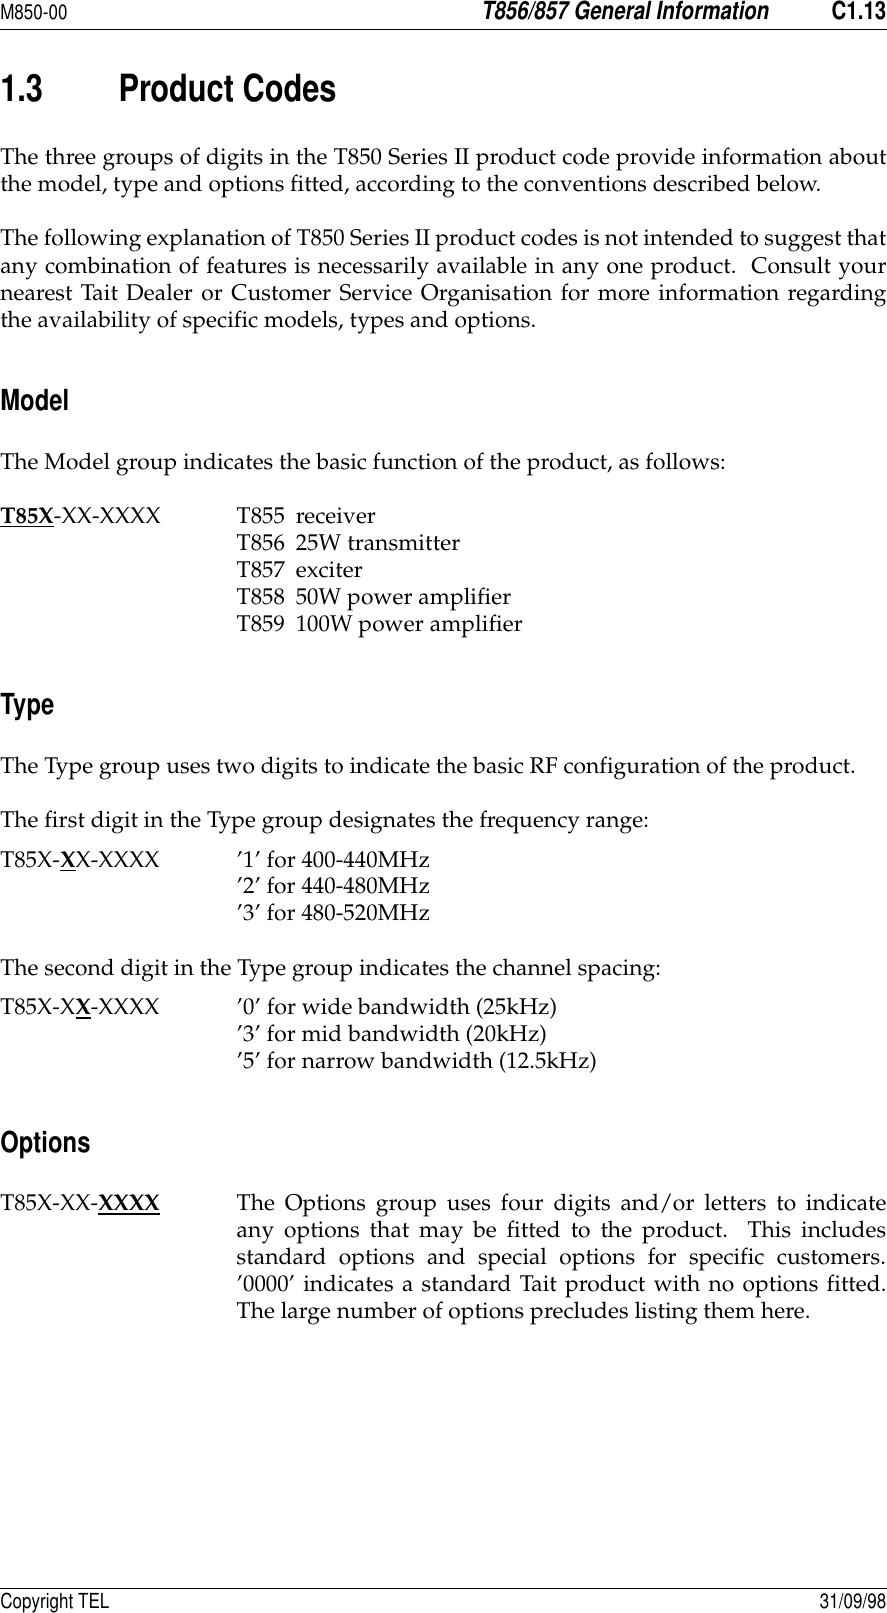 M850-00T856/857 General InformationC1.13Copyright TEL 31/09/981.3 Product CodesThe three groups of digits in the T850 Series II product code provide information aboutthe model, type and options fitted, according to the conventions described below.The following explanation of T850 Series II product codes is not intended to suggest thatany combination of features is necessarily available in any one product.  Consult yournearest Tait Dealer or Customer Service Organisation for more information regardingthe availability of specific models, types and options.ModelThe Model group indicates the basic function of the product, as follows:T85X-XX-XXXX T855 receiverT856 25W transmitterT857 exciterT858 50W power amplifierT859 100W power amplifierTypeThe Type group uses two digits to indicate the basic RF configuration of the product.The first digit in the Type group designates the frequency range:T85X-XX-XXXX ’1’ for 400-440MHz’2’ for 440-480MHz’3’ for 480-520MHzThe second digit in the Type group indicates the channel spacing:T85X-XX-XXXX ’0’ for wide bandwidth (25kHz)’3’ for mid bandwidth (20kHz)’5’ for narrow bandwidth (12.5kHz)OptionsT85X-XX-XXXX The Options group uses four digits and/or letters to indicateany options that may be fitted to the product.  This includesstandard options and special options for specific customers.’0000’ indicates a standard Tait product with no options fitted.The large number of options precludes listing them here.